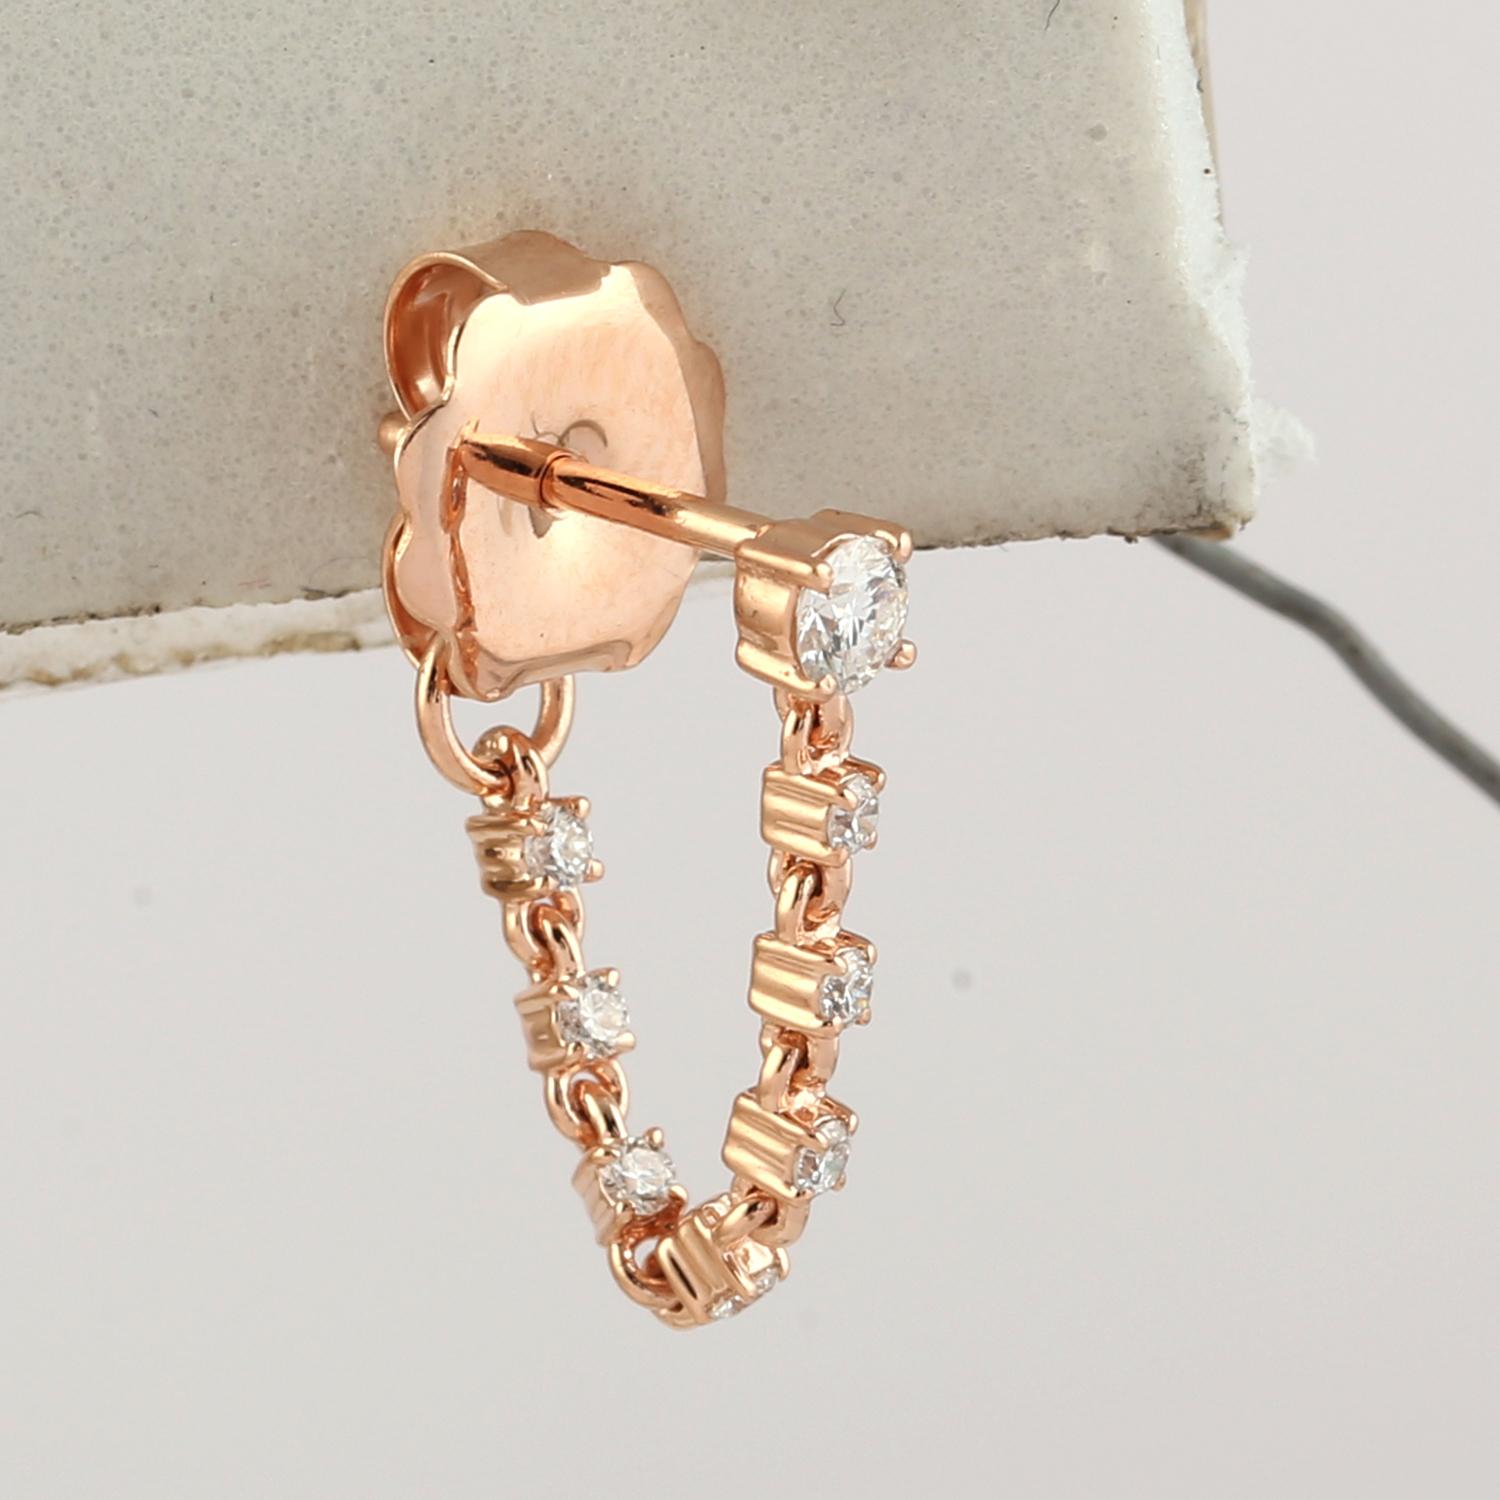 Mixed Cut Diamond Chain Thread Earrings Made In 14k Rose Gold For Sale